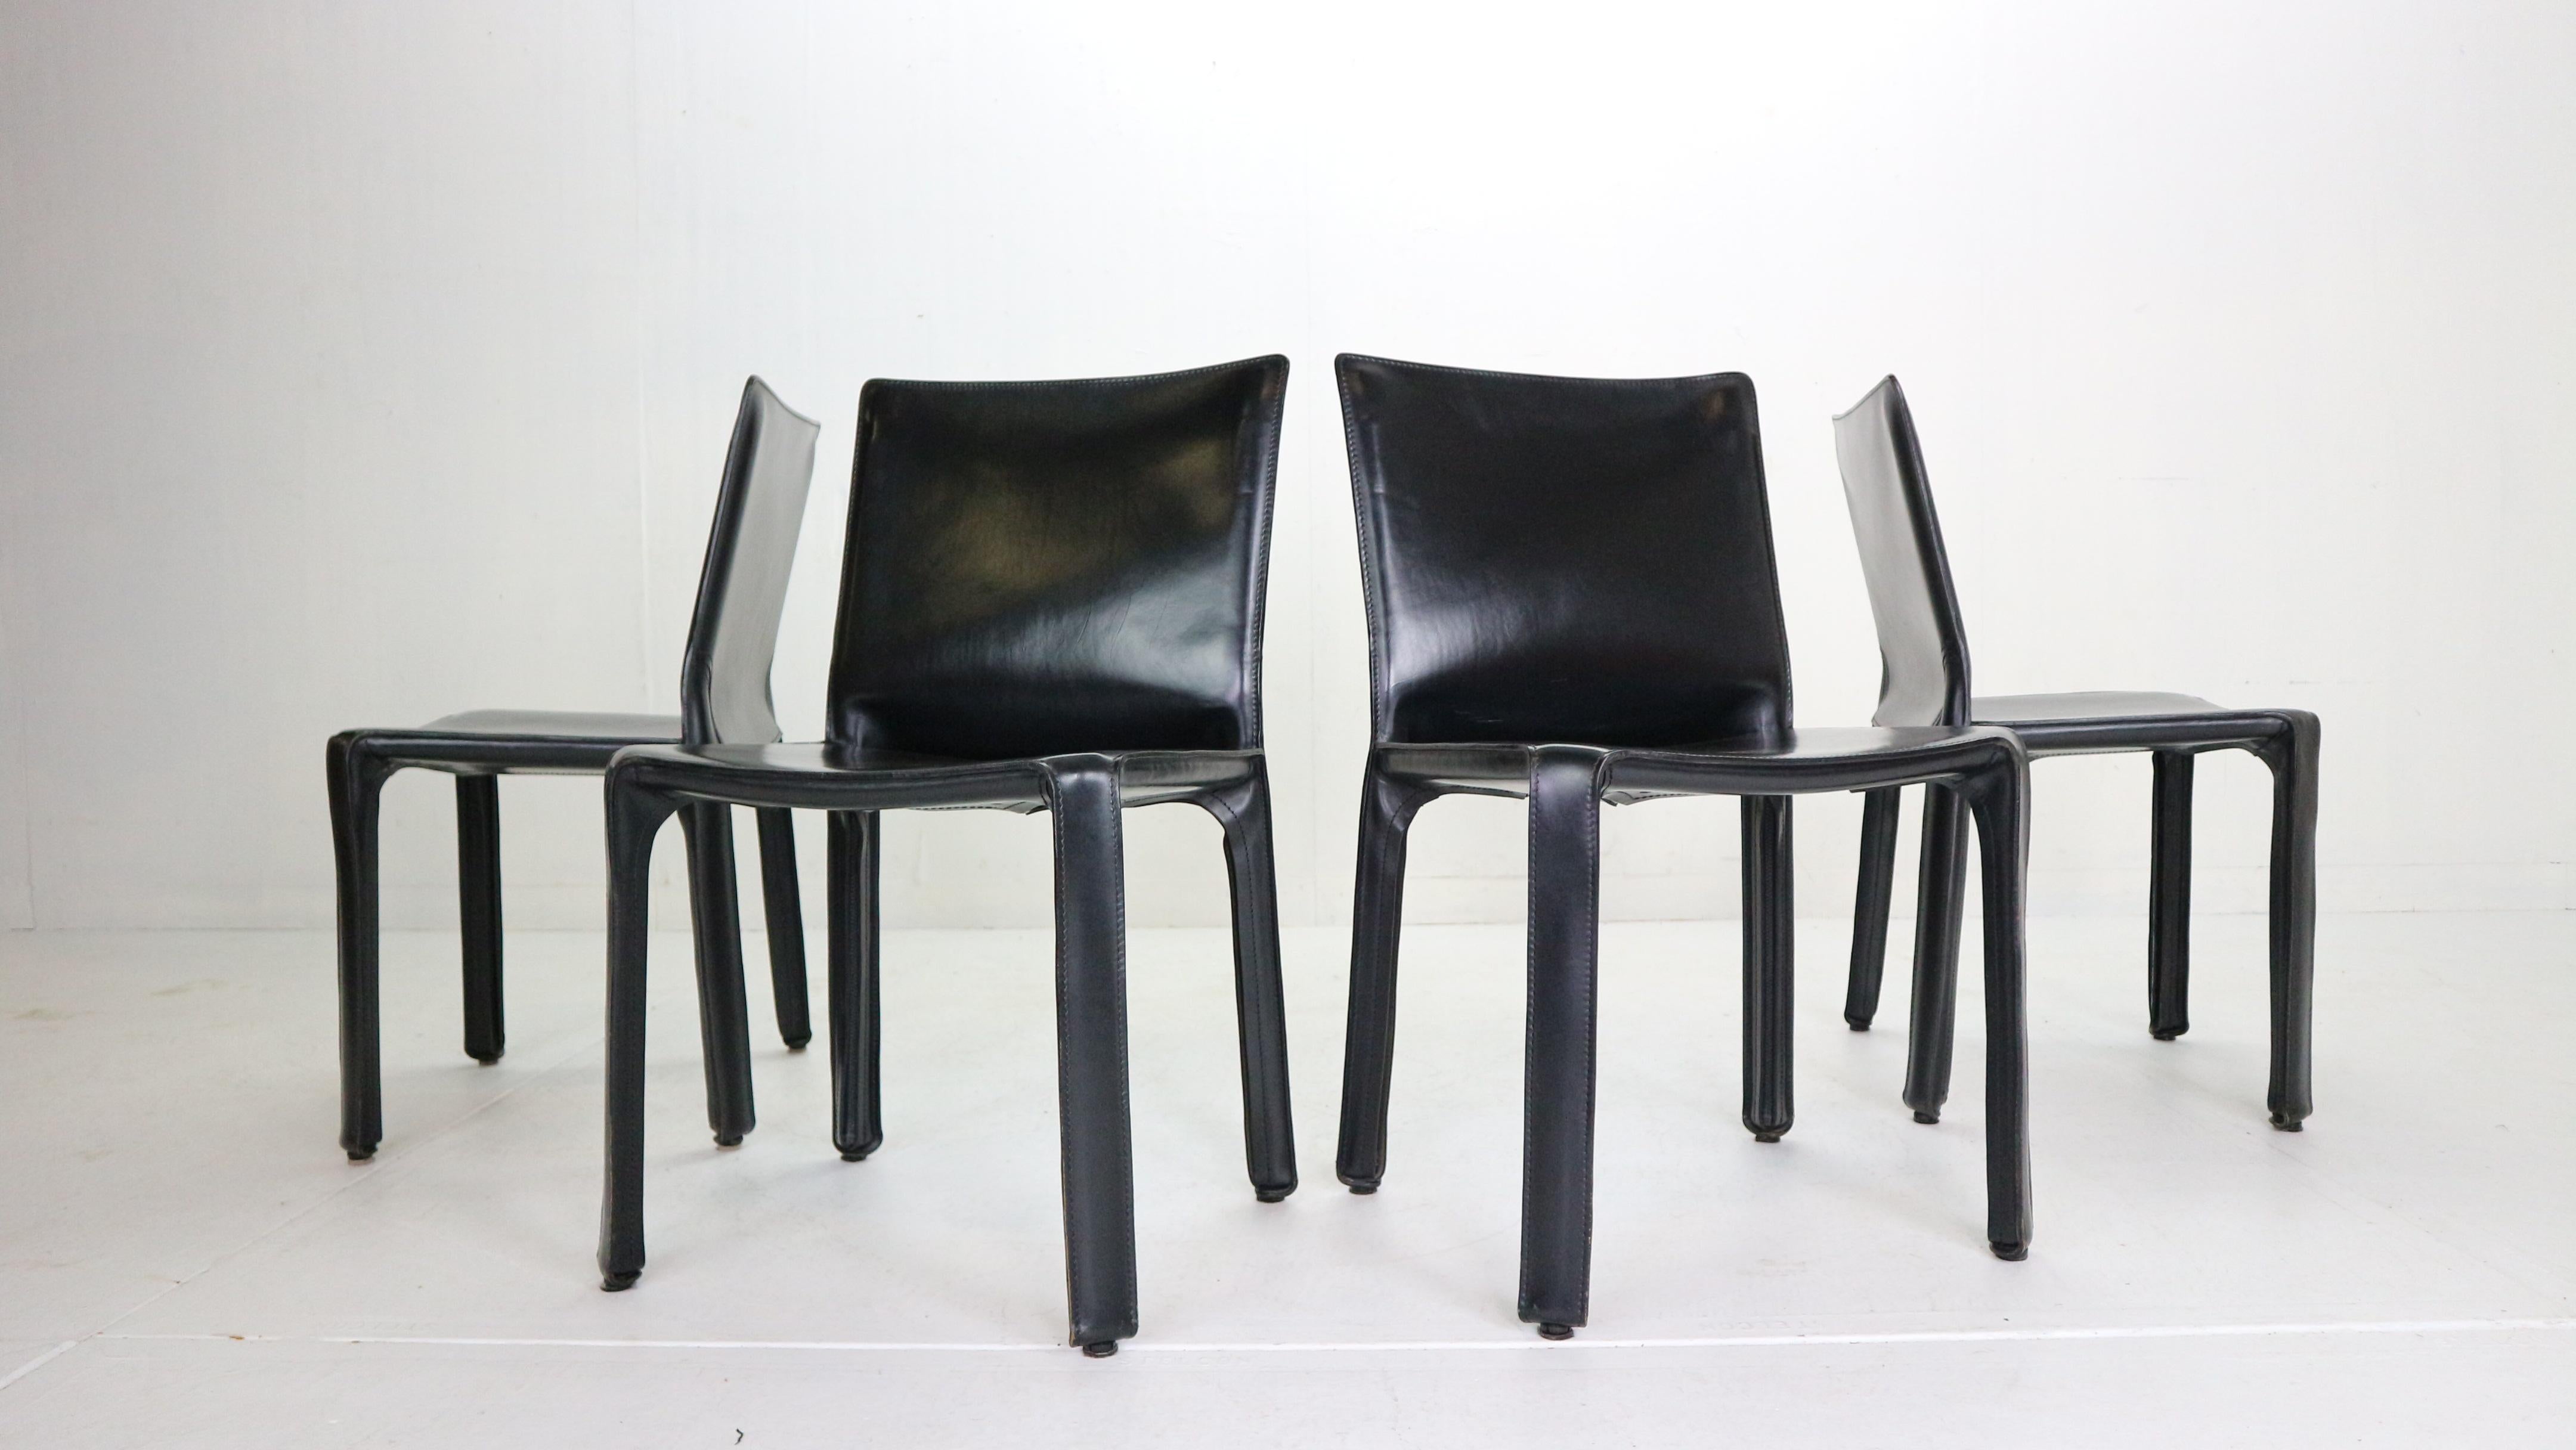 Set of 4 dining room chairs designed by Mario Bellini and manufactured by high quality design furniture fabric- Cassina in 1970s period, Italy.
Model- Cab 412. All chairs are marked and in a very good vintage condition.
Cab chairs consists of a